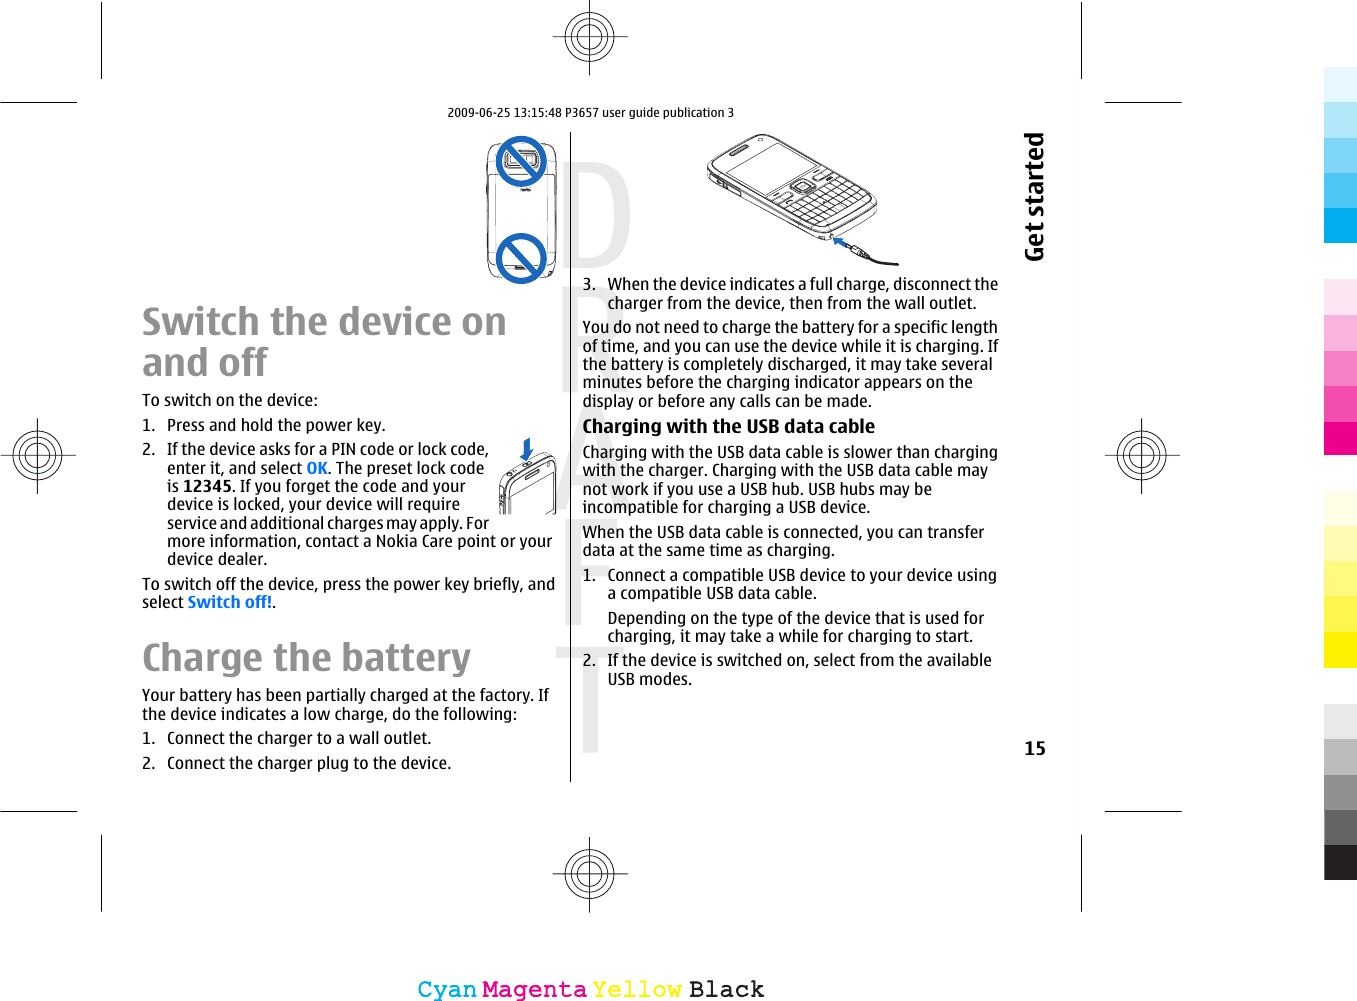 Switch the device onand offTo switch on the device:1. Press and hold the power key.2. If the device asks for a PIN code or lock code,enter it, and select OK. The preset lock codeis 12345. If you forget the code and yourdevice is locked, your device will requireservice and additional charges may apply. Formore information, contact a Nokia Care point or yourdevice dealer.To switch off the device, press the power key briefly, andselect Switch off!.Charge the batteryYour battery has been partially charged at the factory. Ifthe device indicates a low charge, do the following:1. Connect the charger to a wall outlet.2. Connect the charger plug to the device.3. When the device indicates a full charge, disconnect thecharger from the device, then from the wall outlet.You do not need to charge the battery for a specific lengthof time, and you can use the device while it is charging. Ifthe battery is completely discharged, it may take severalminutes before the charging indicator appears on thedisplay or before any calls can be made.Charging with the USB data cableCharging with the USB data cable is slower than chargingwith the charger. Charging with the USB data cable maynot work if you use a USB hub. USB hubs may beincompatible for charging a USB device.When the USB data cable is connected, you can transferdata at the same time as charging.1. Connect a compatible USB device to your device usinga compatible USB data cable.Depending on the type of the device that is used forcharging, it may take a while for charging to start.2. If the device is switched on, select from the availableUSB modes.15Get startedCyanCyanMagentaMagentaYellowYellowBlackBlack2009-06-25 13:15:48 P3657 user guide publication 3